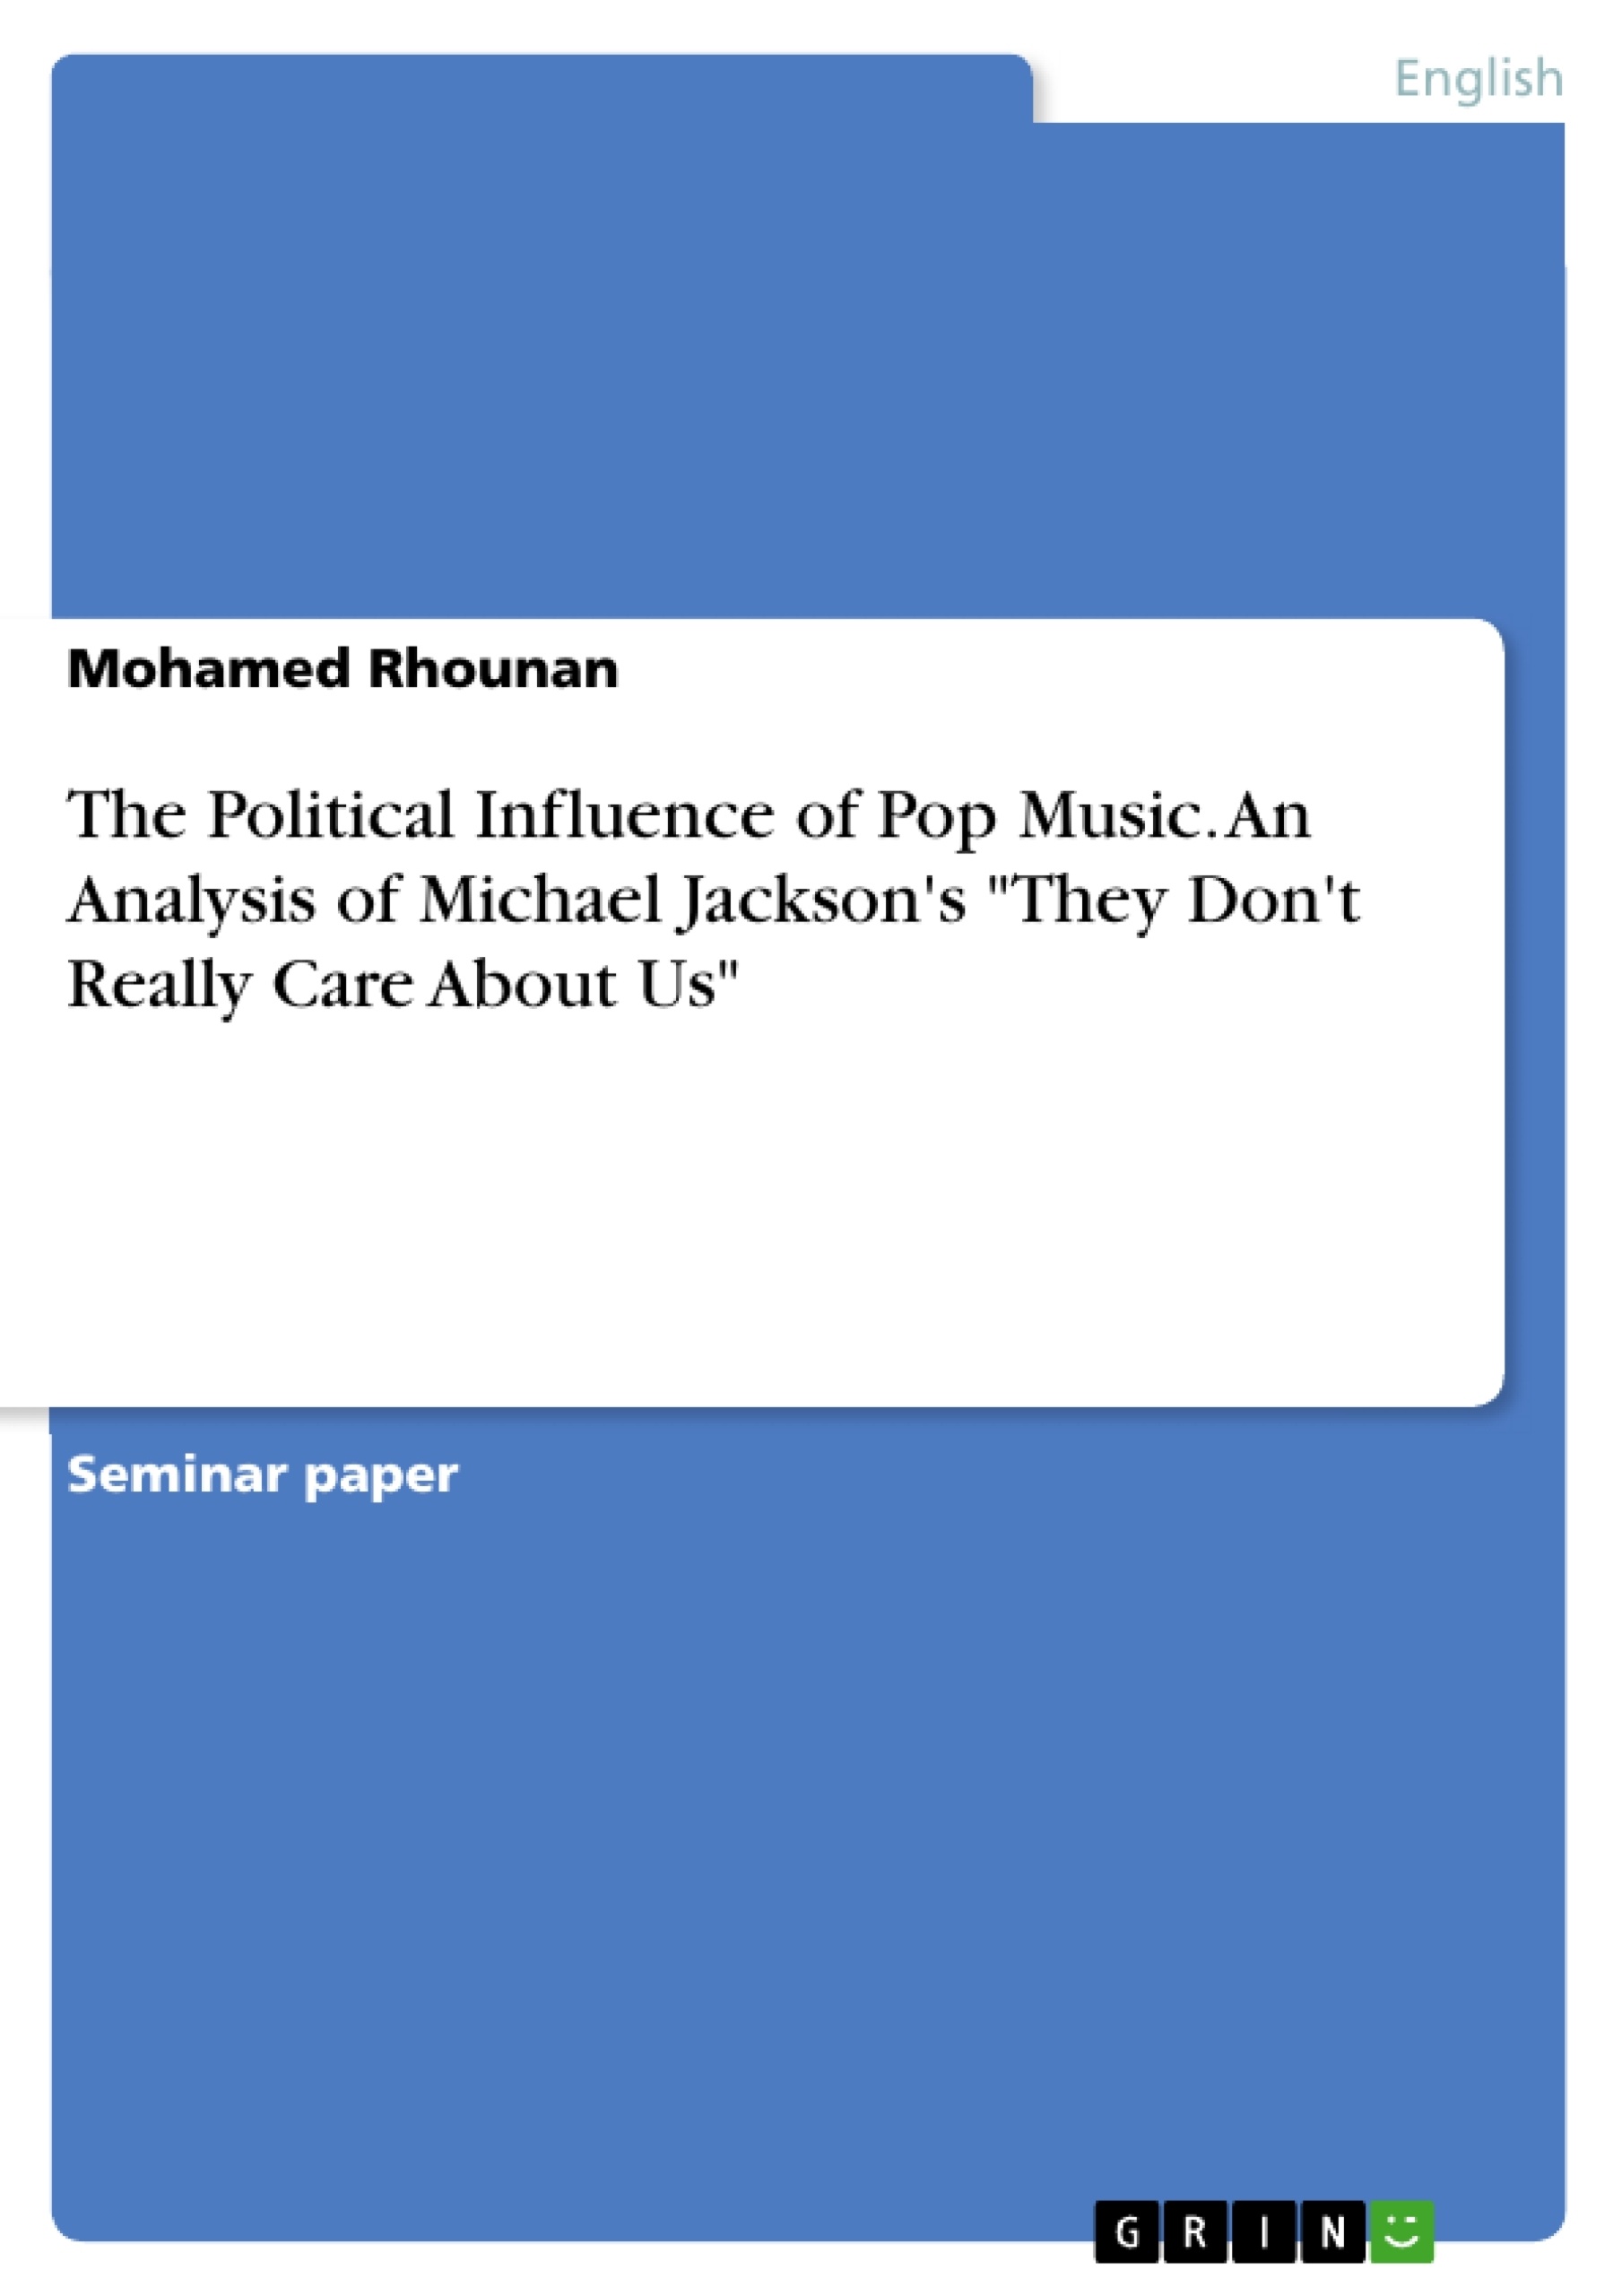 Title: The Political Influence of Pop Music. An Analysis of Michael Jackson's "They Don't Really Care About Us"